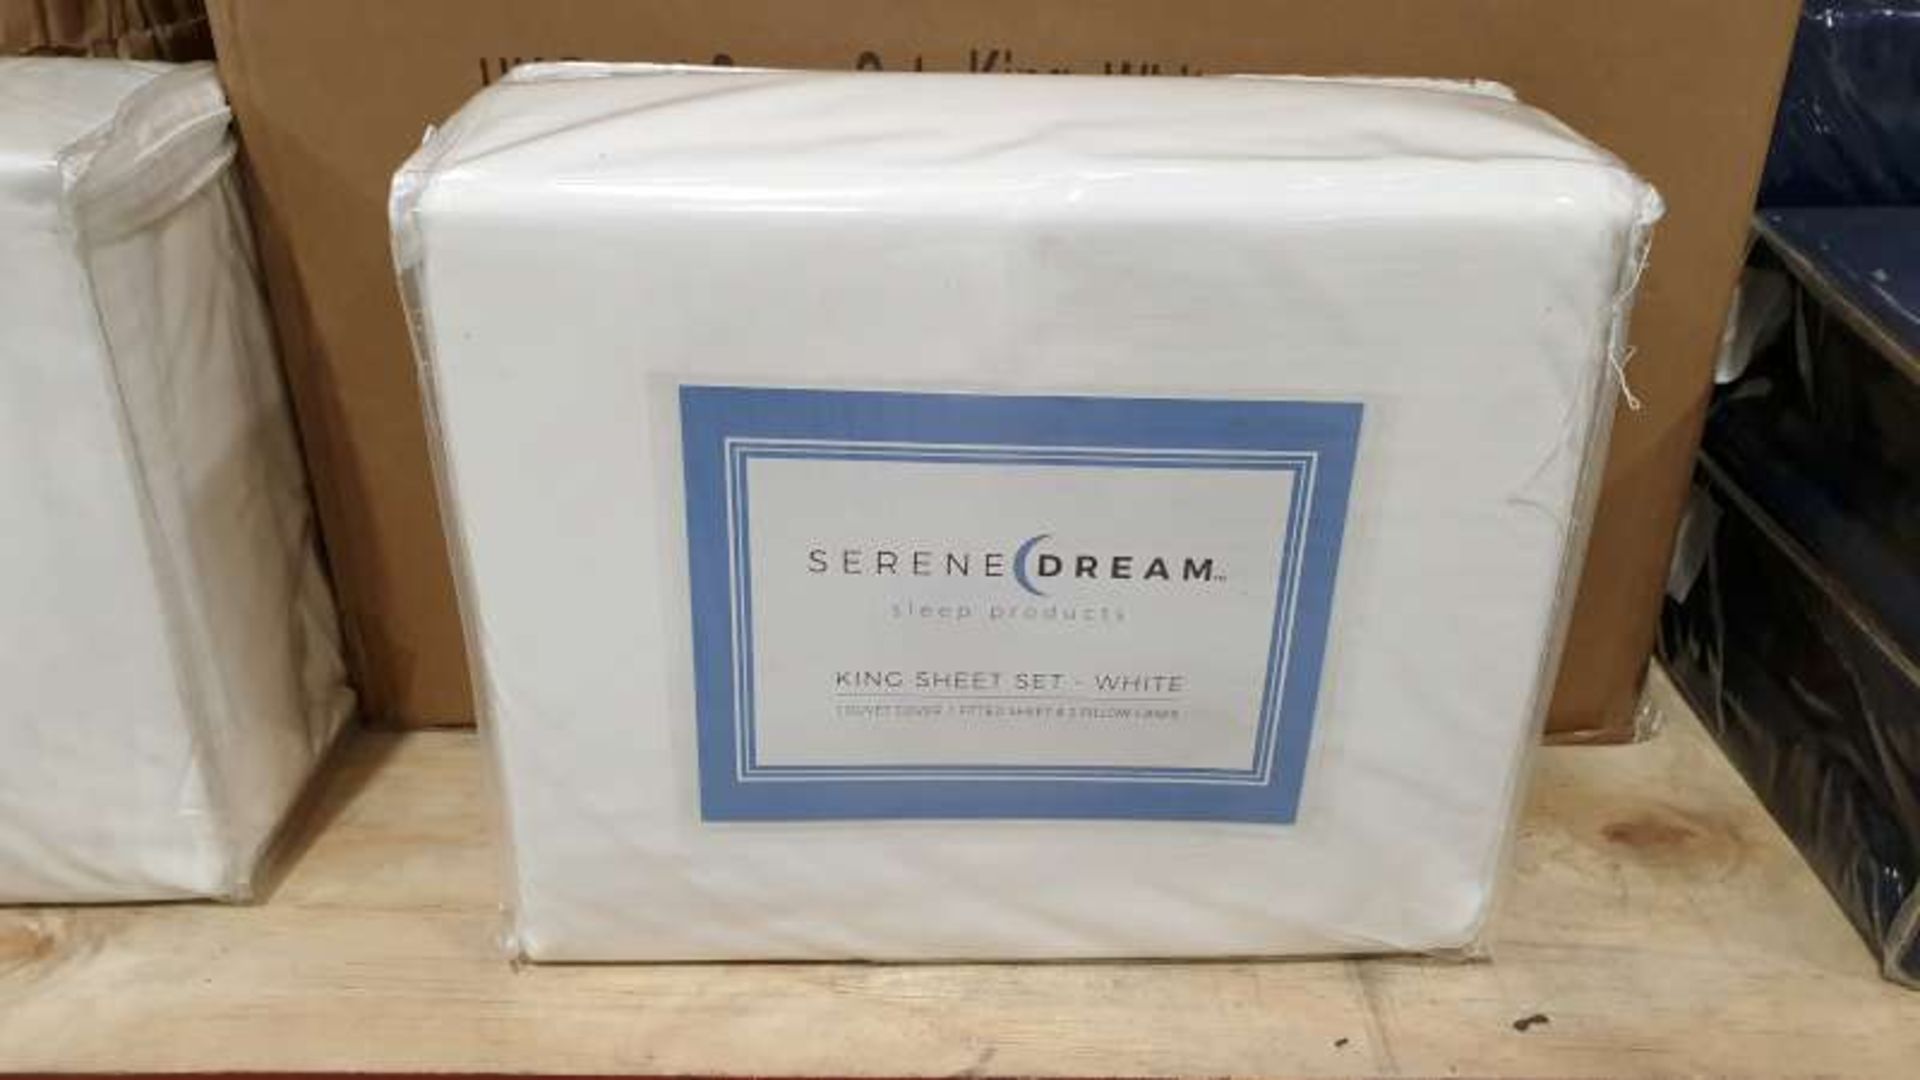 12 X WHITE COLOURED SERENE DREAMS KING SIZE DUVET SETS EACH SET CONTAINS DUVET COVER, FITTED SHEETS,